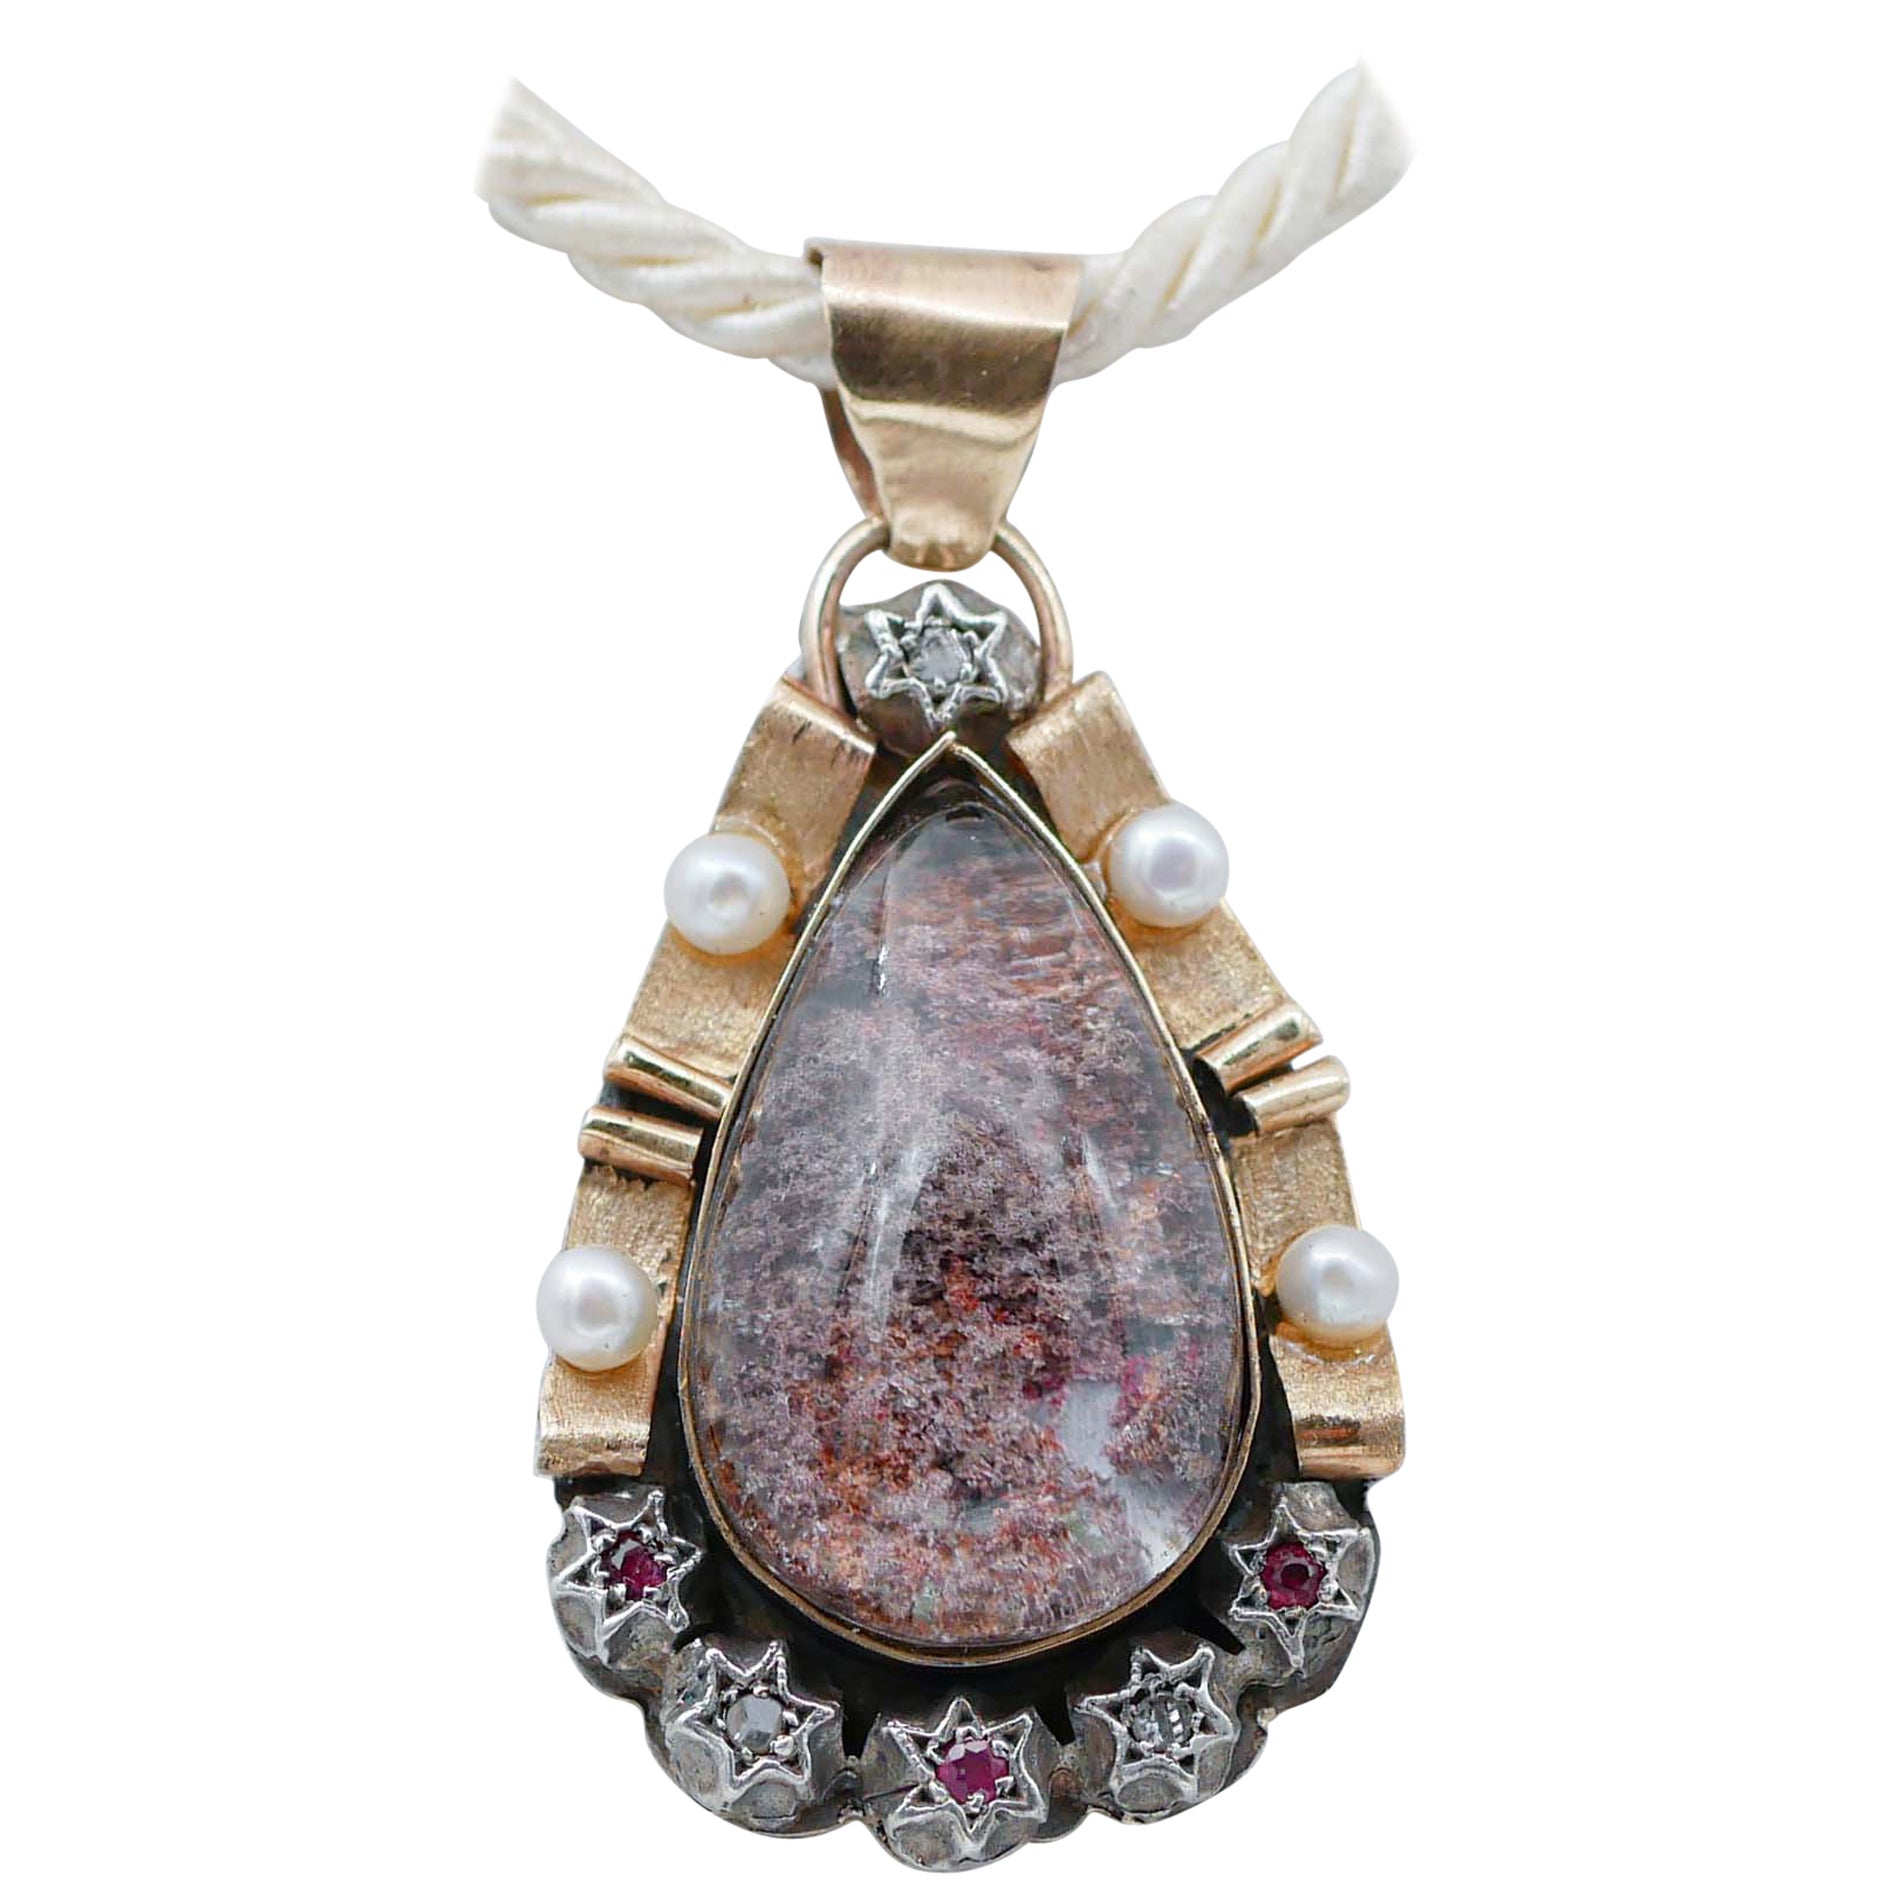 Diamonds, Rubies, Musk Quartz, Pearls, Rose Gold and Silver Pendant Necklace. For Sale